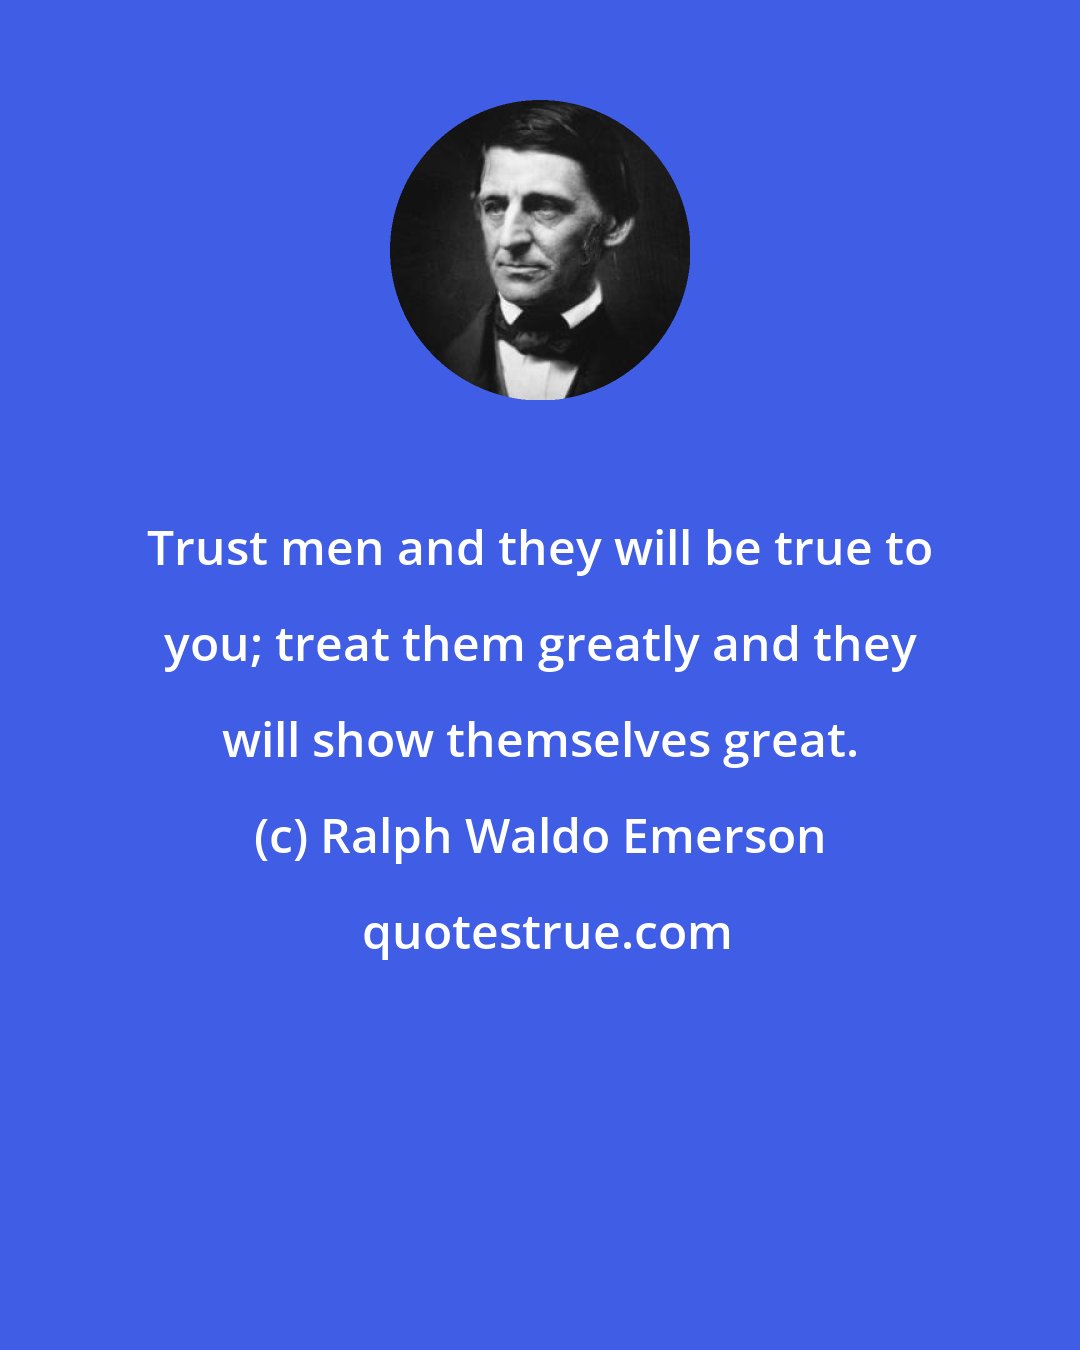 Ralph Waldo Emerson: Trust men and they will be true to you; treat them greatly and they will show themselves great.